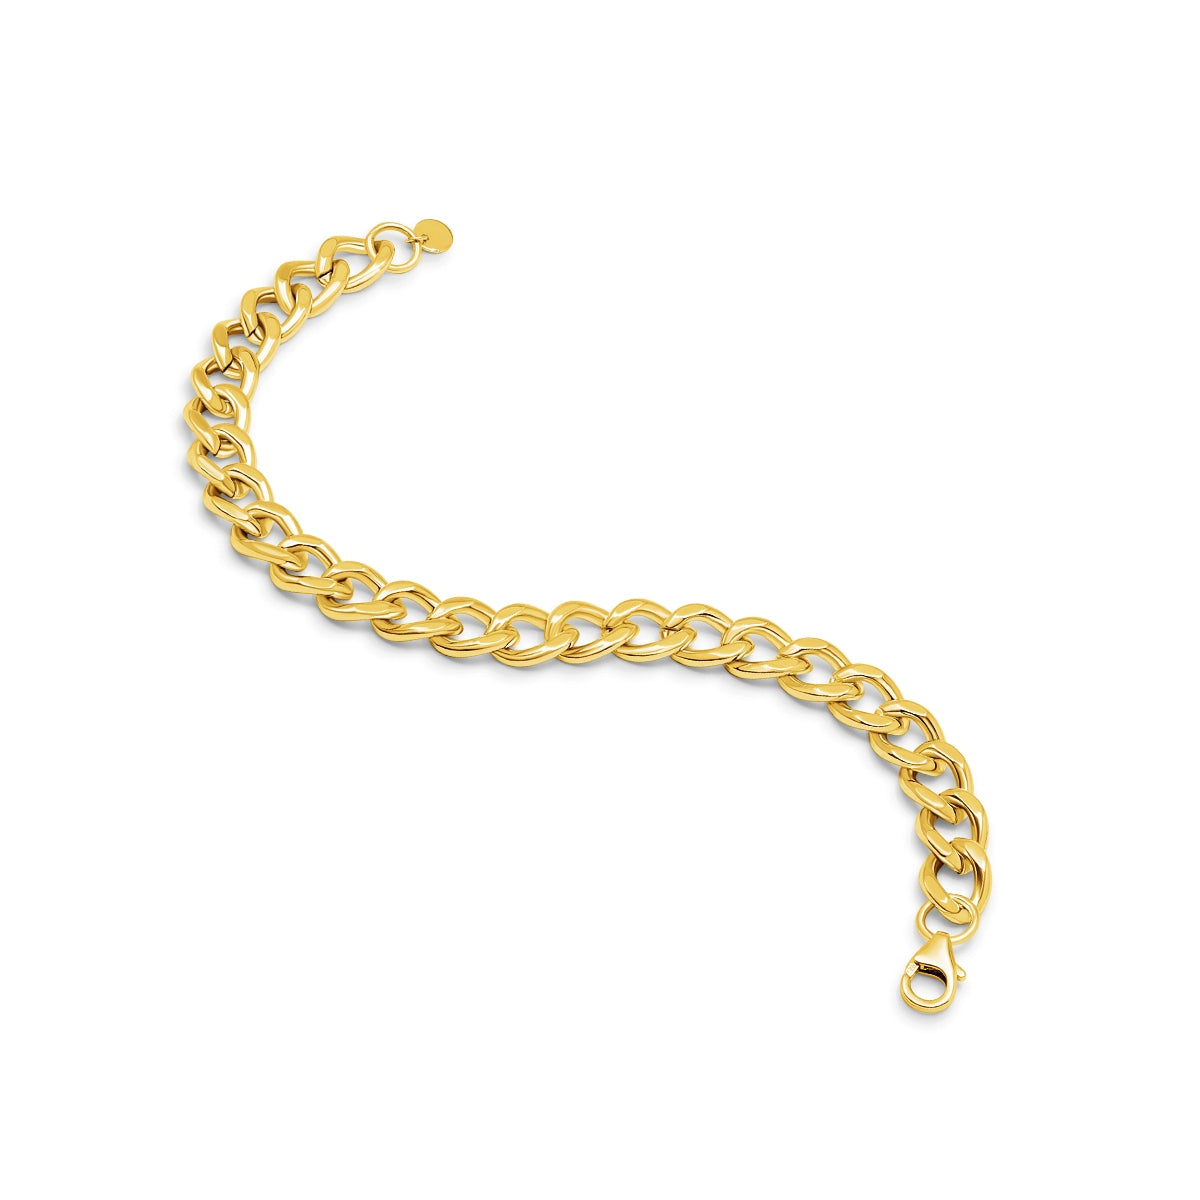 Thick gold plated cuban bracelet